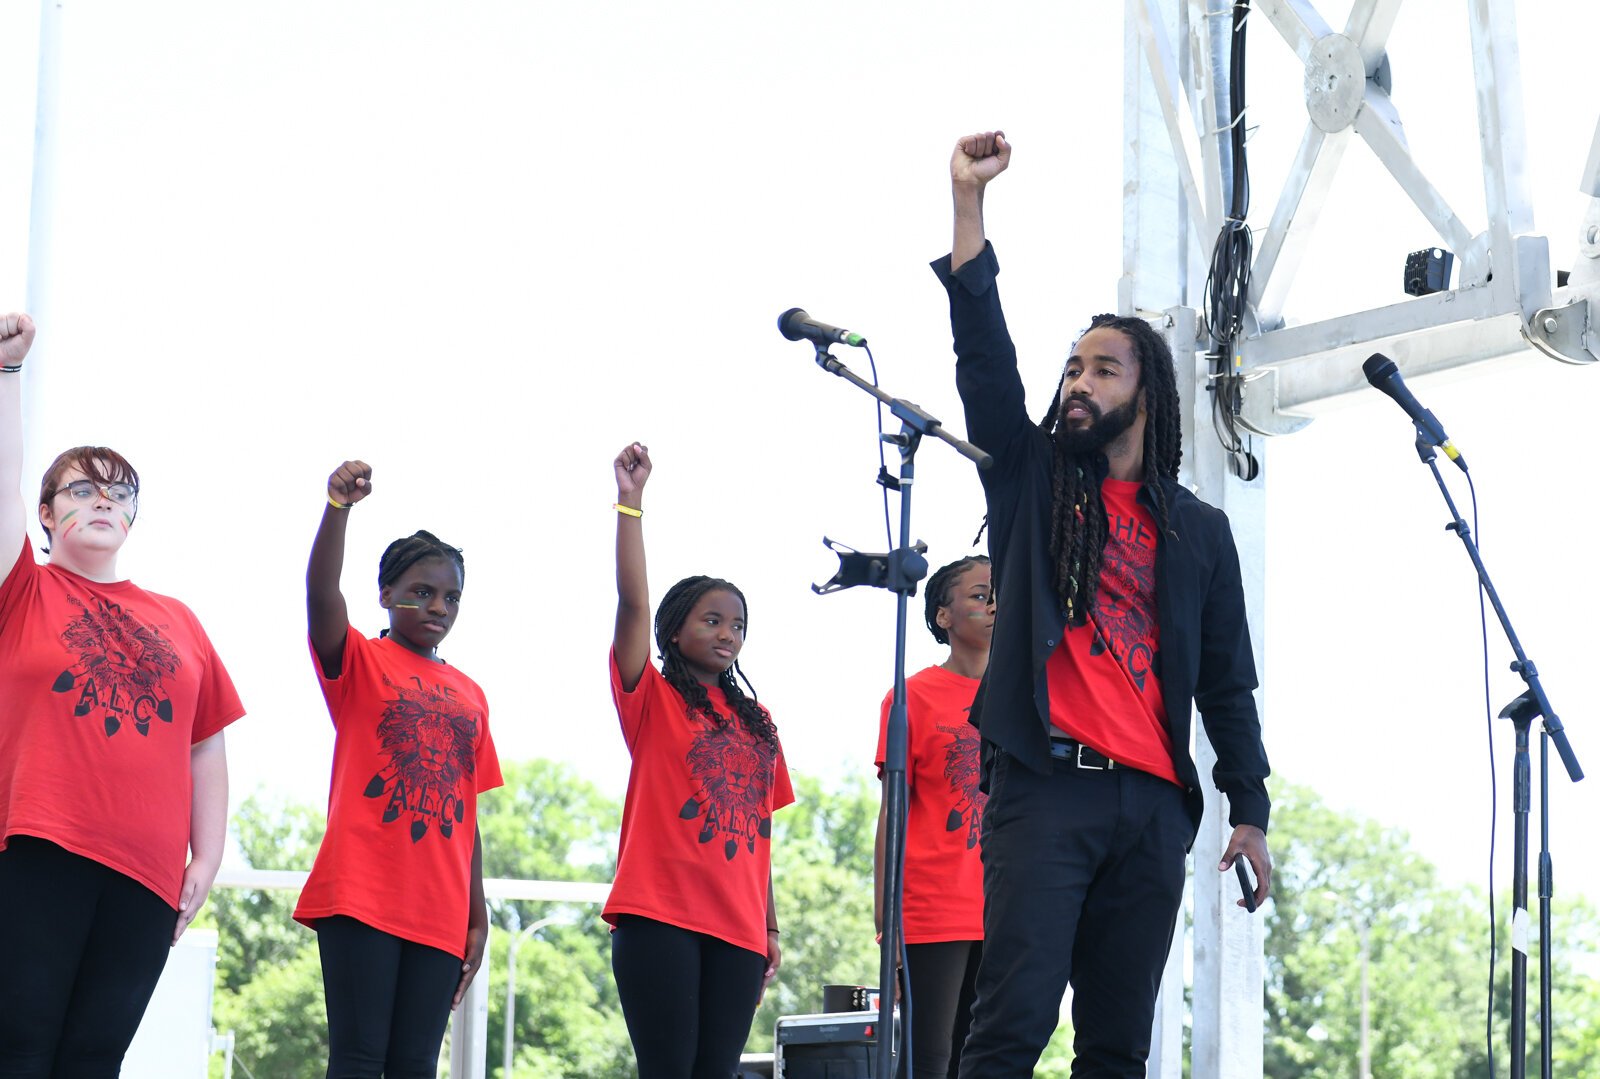 Adrian Curry with The Art Leadership Center speaks during the Juneteenth Macknificent Freedom Fest at McMillen Park on June 18, 2022.